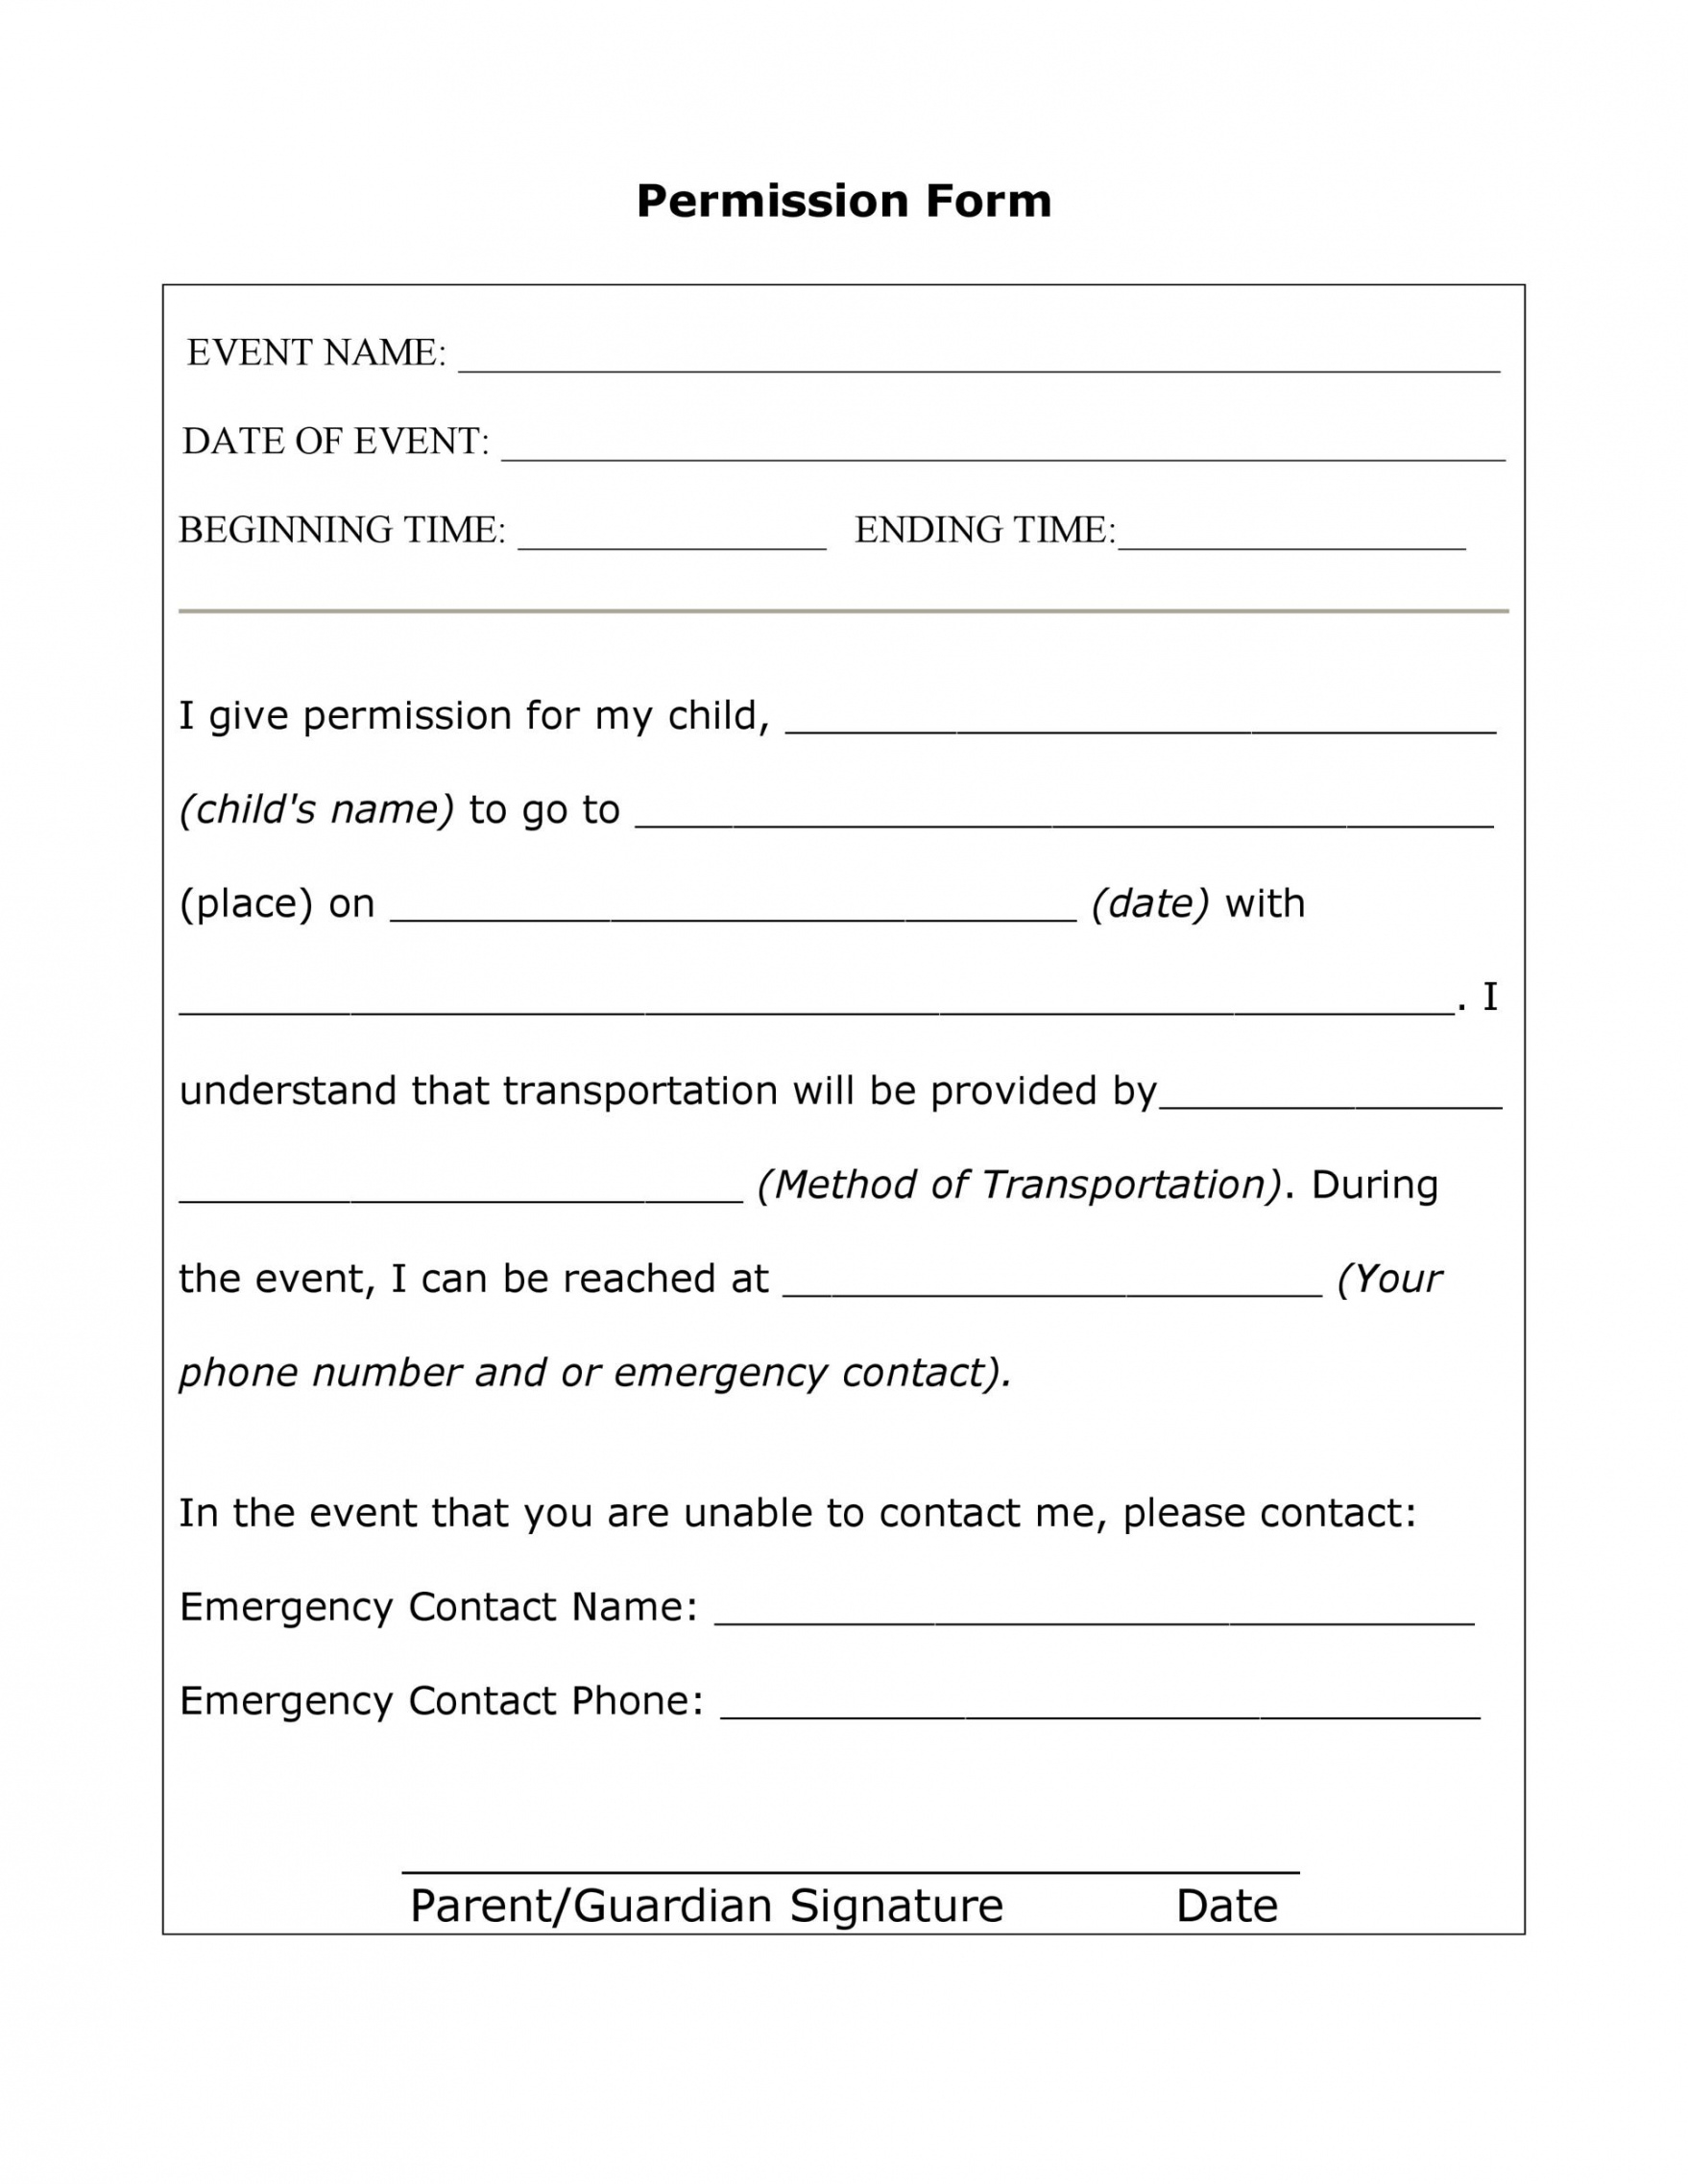 35 permission slip templates &amp; field trip forms field trip release form template doc